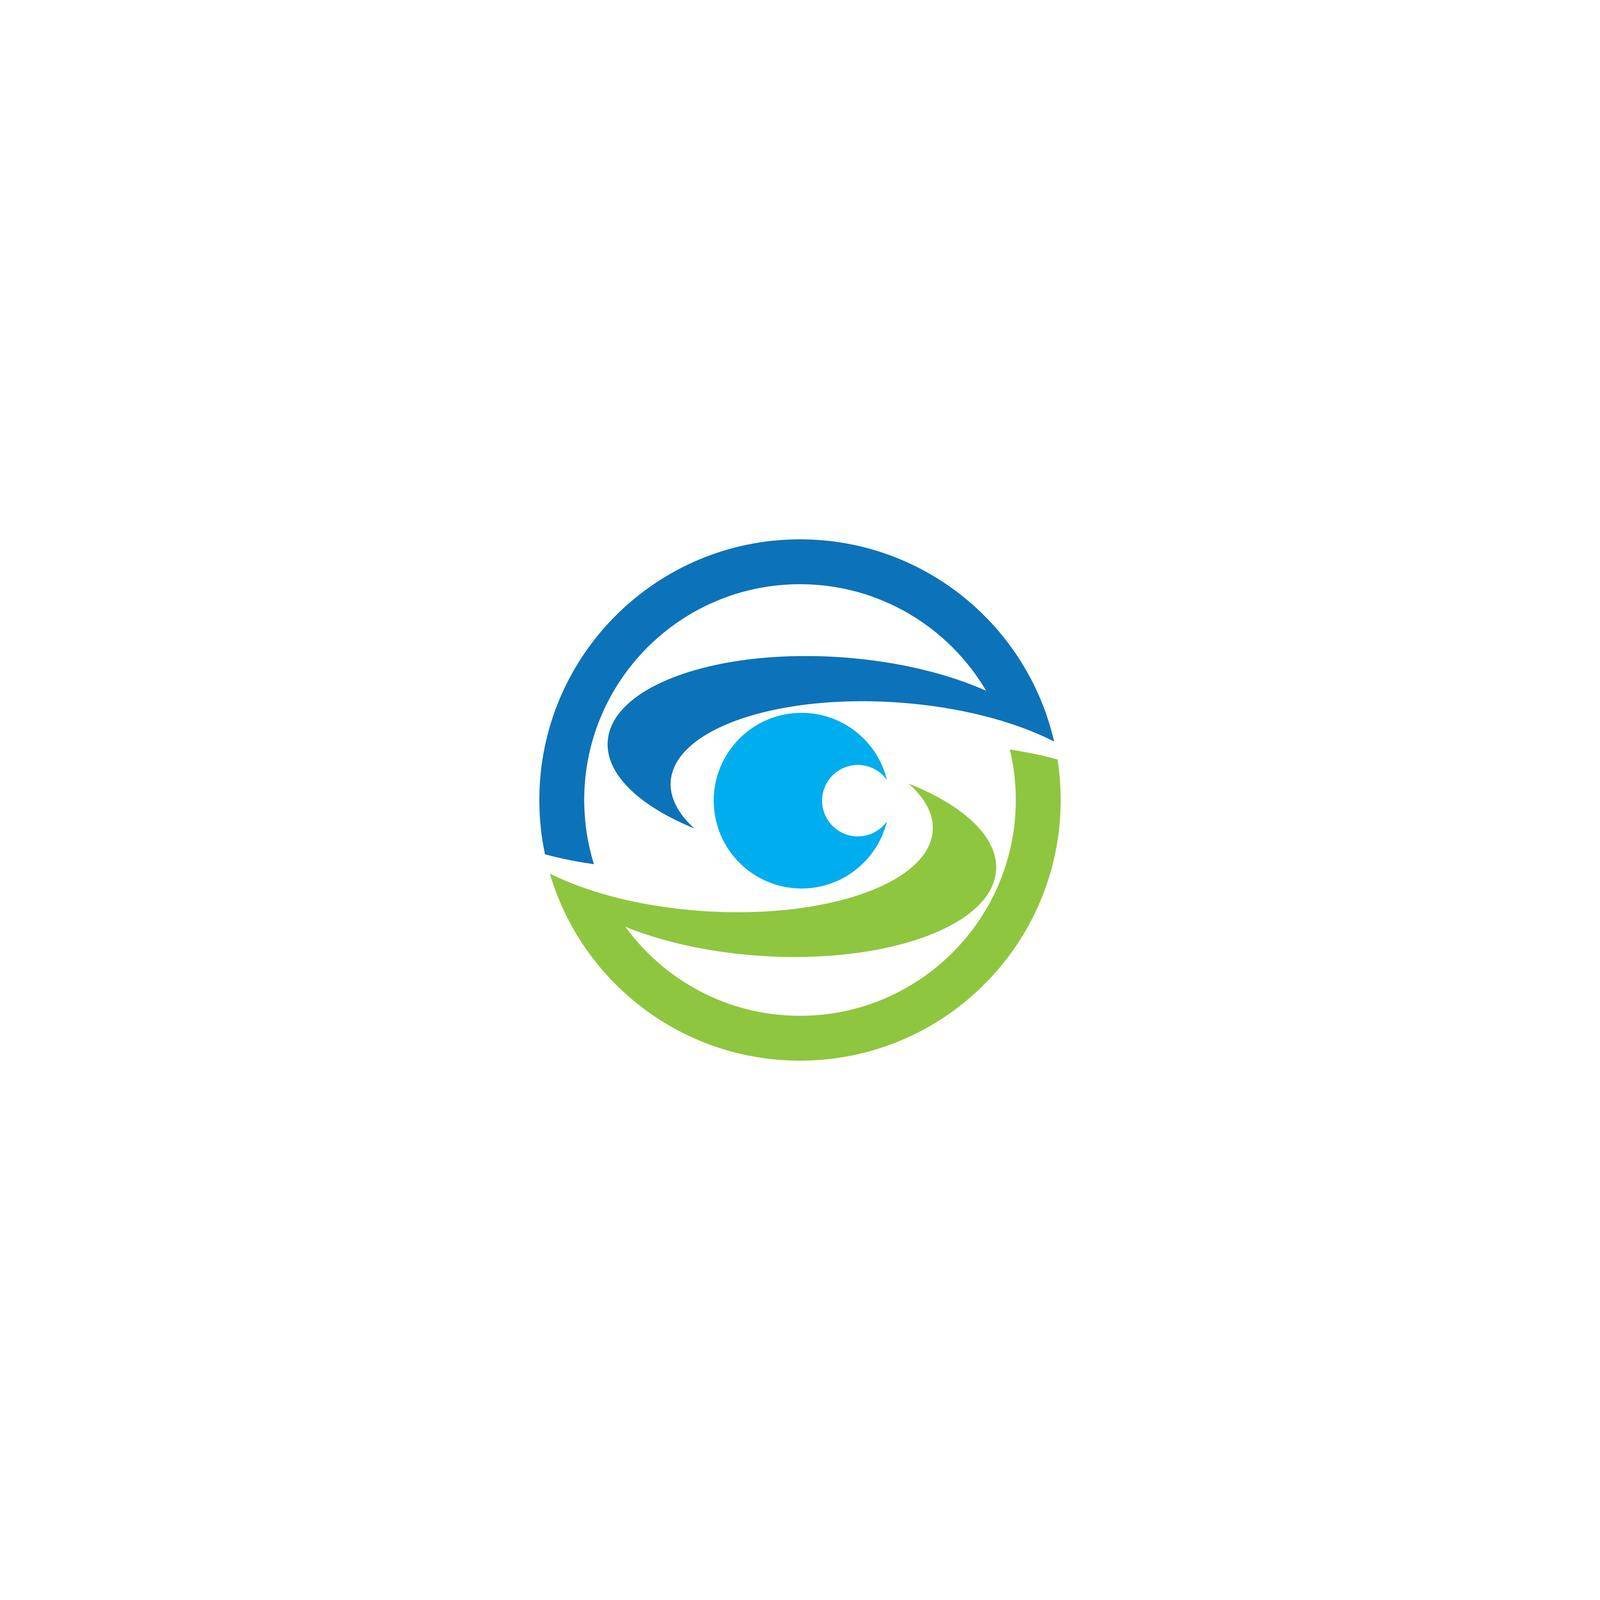 Eye Care vector logo design by Redgraphic